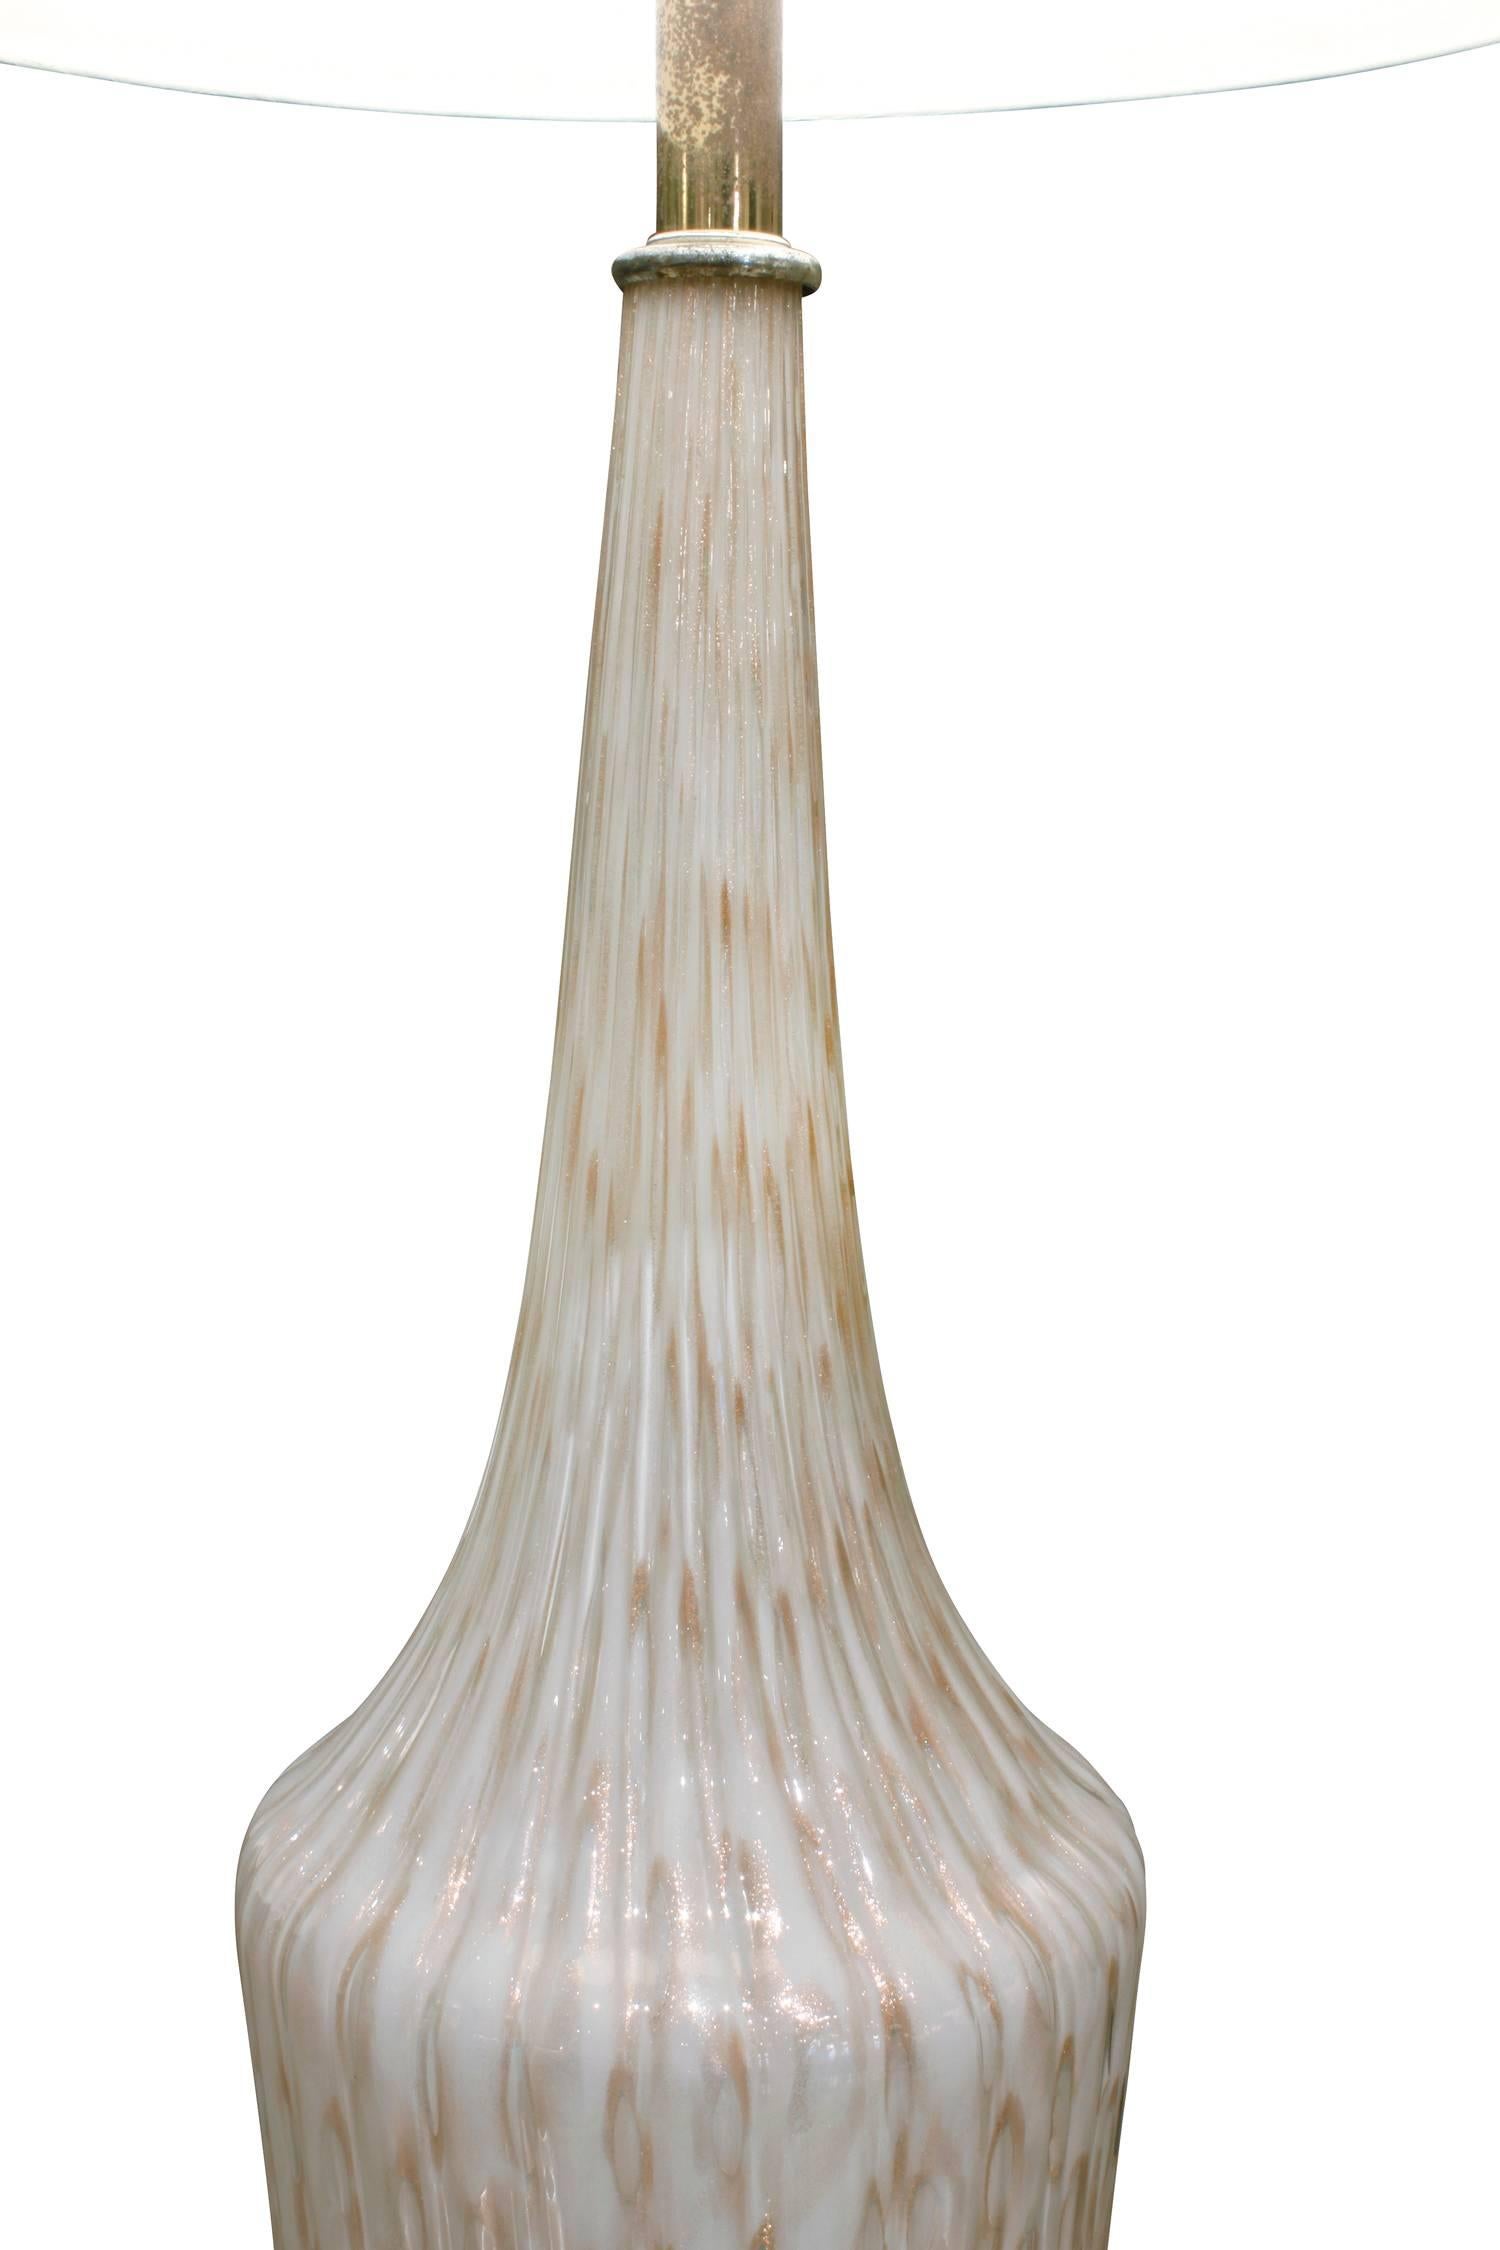 Monumental handblown glass table lamp with controlled bubbles and aventurine with brass band at bottom and marble base attributed to Fratelli Toso, Murano Italy, 1950s.

Measures: 7 inches at base.